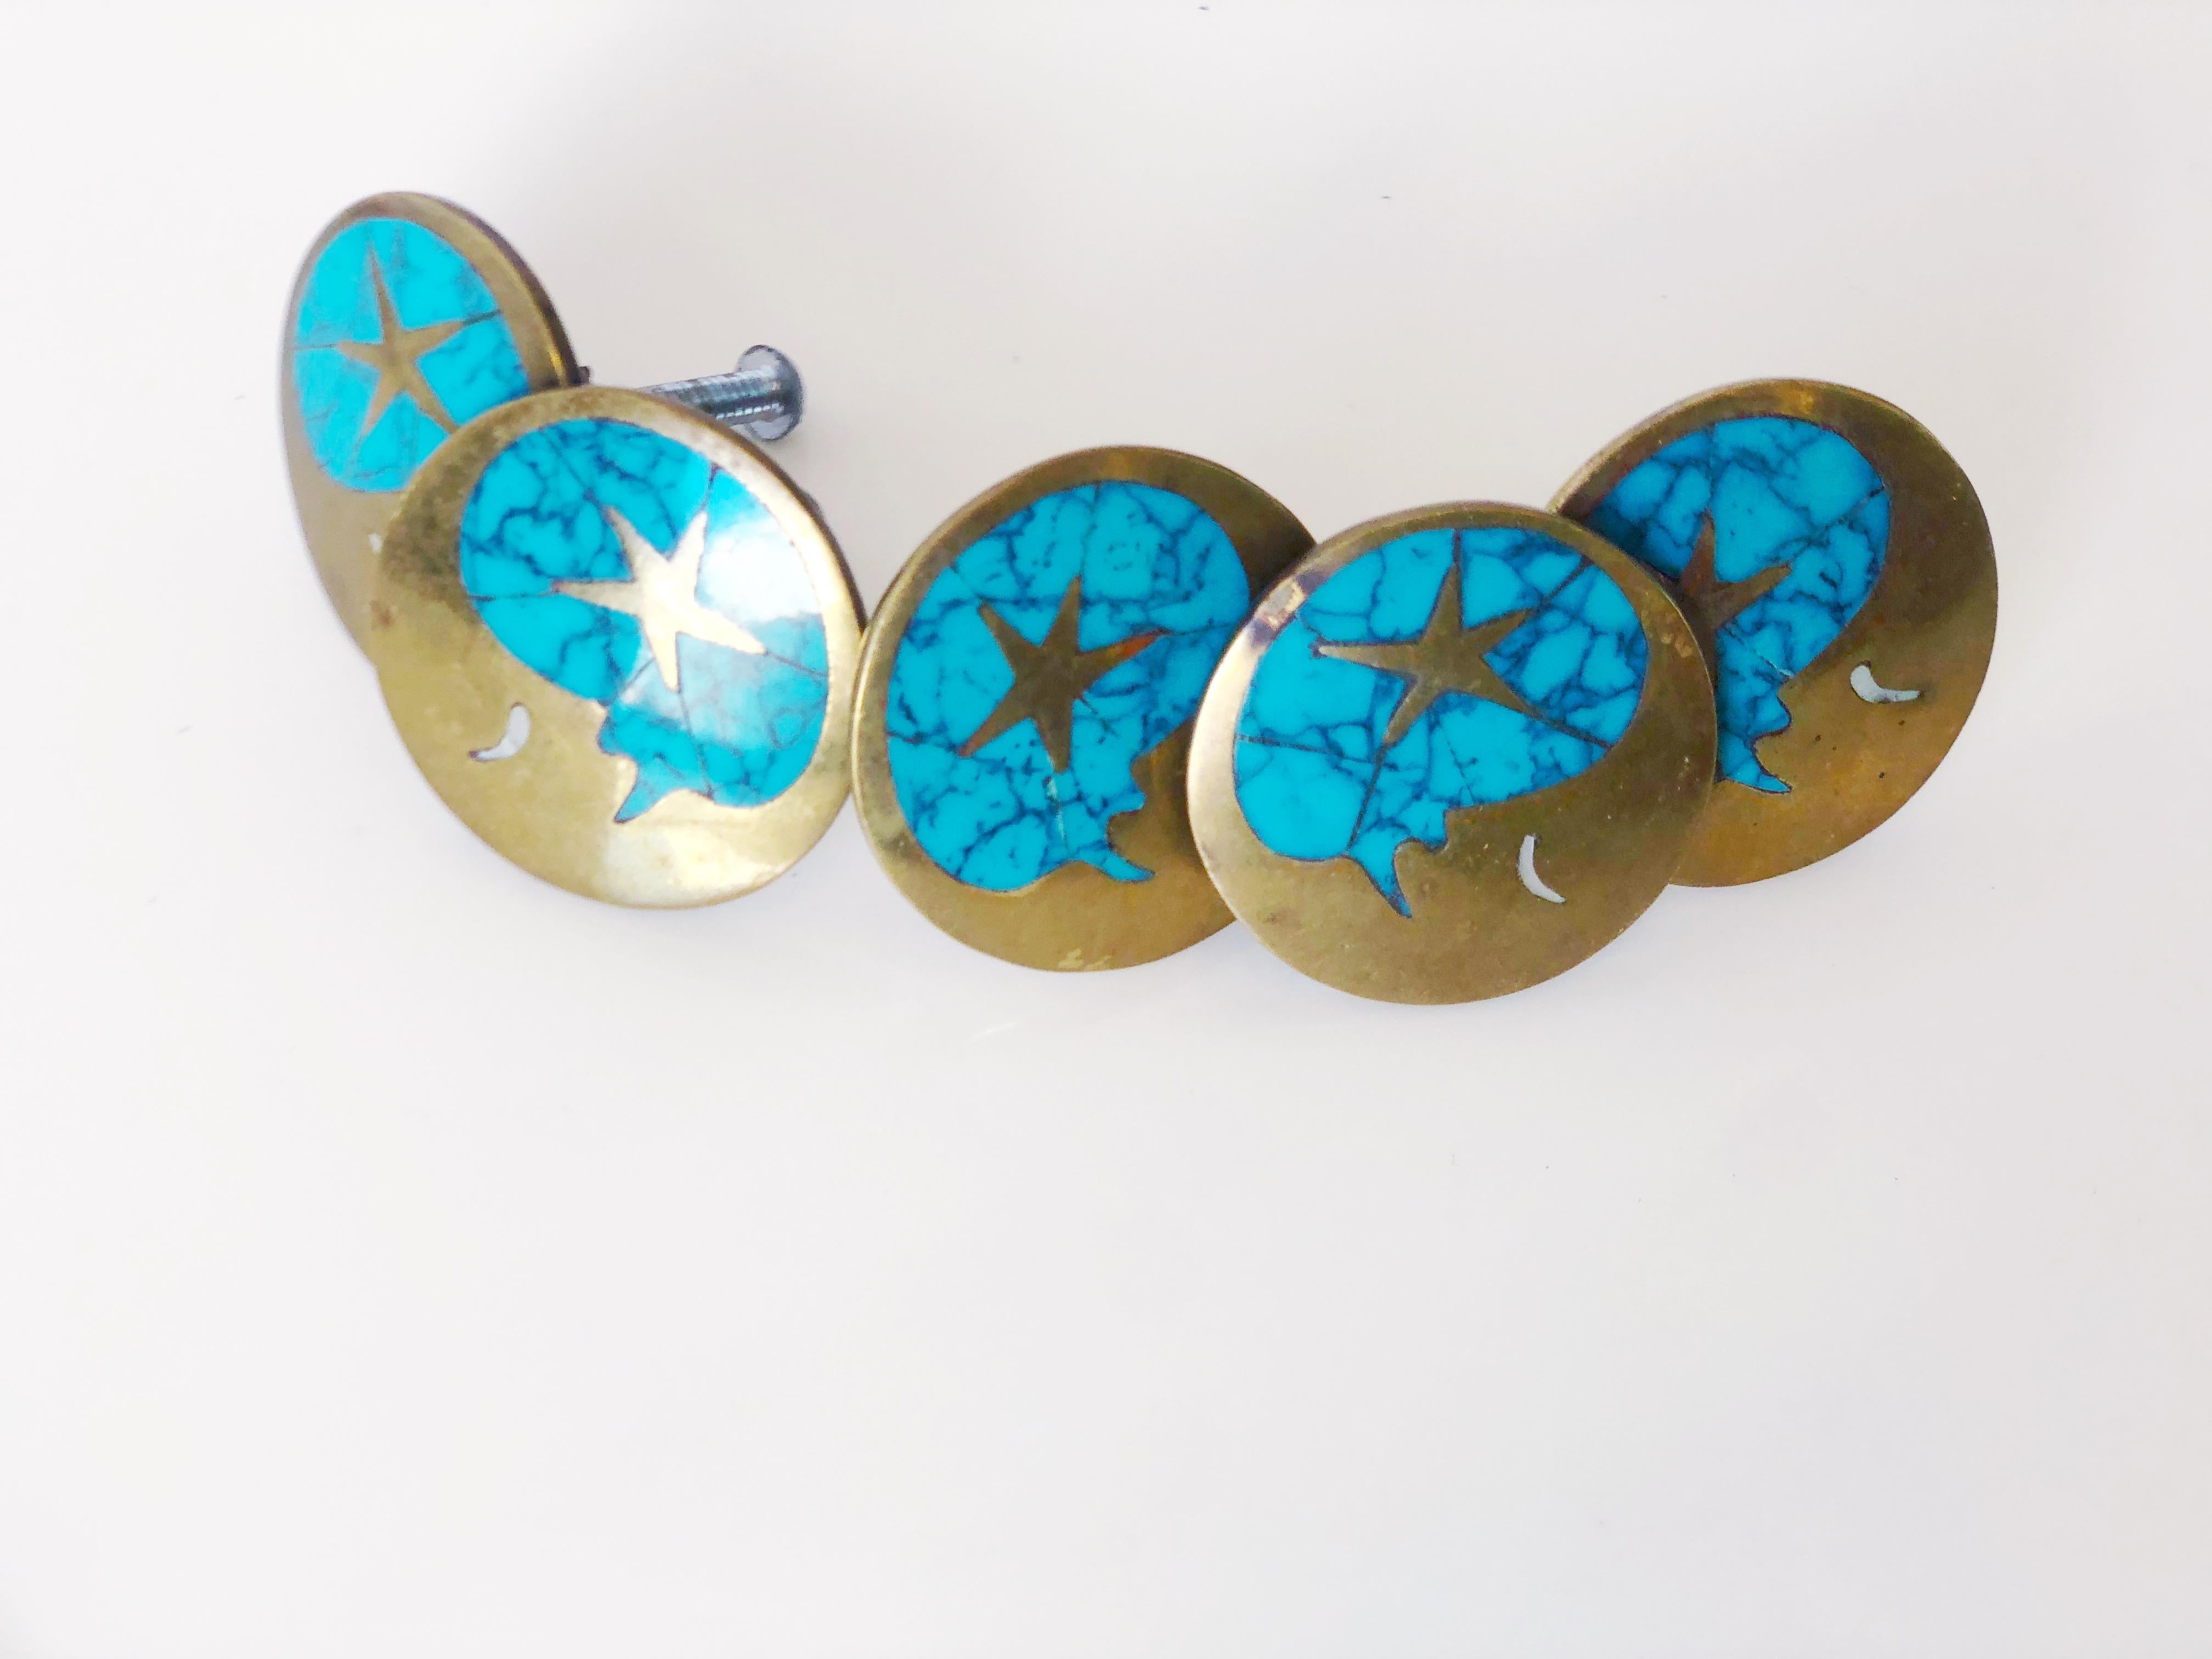 Mid-Century Modern Vintage Blue Turquoise and Brass Drawer Pulls by Los Castillos, Mexico, c. 1960s